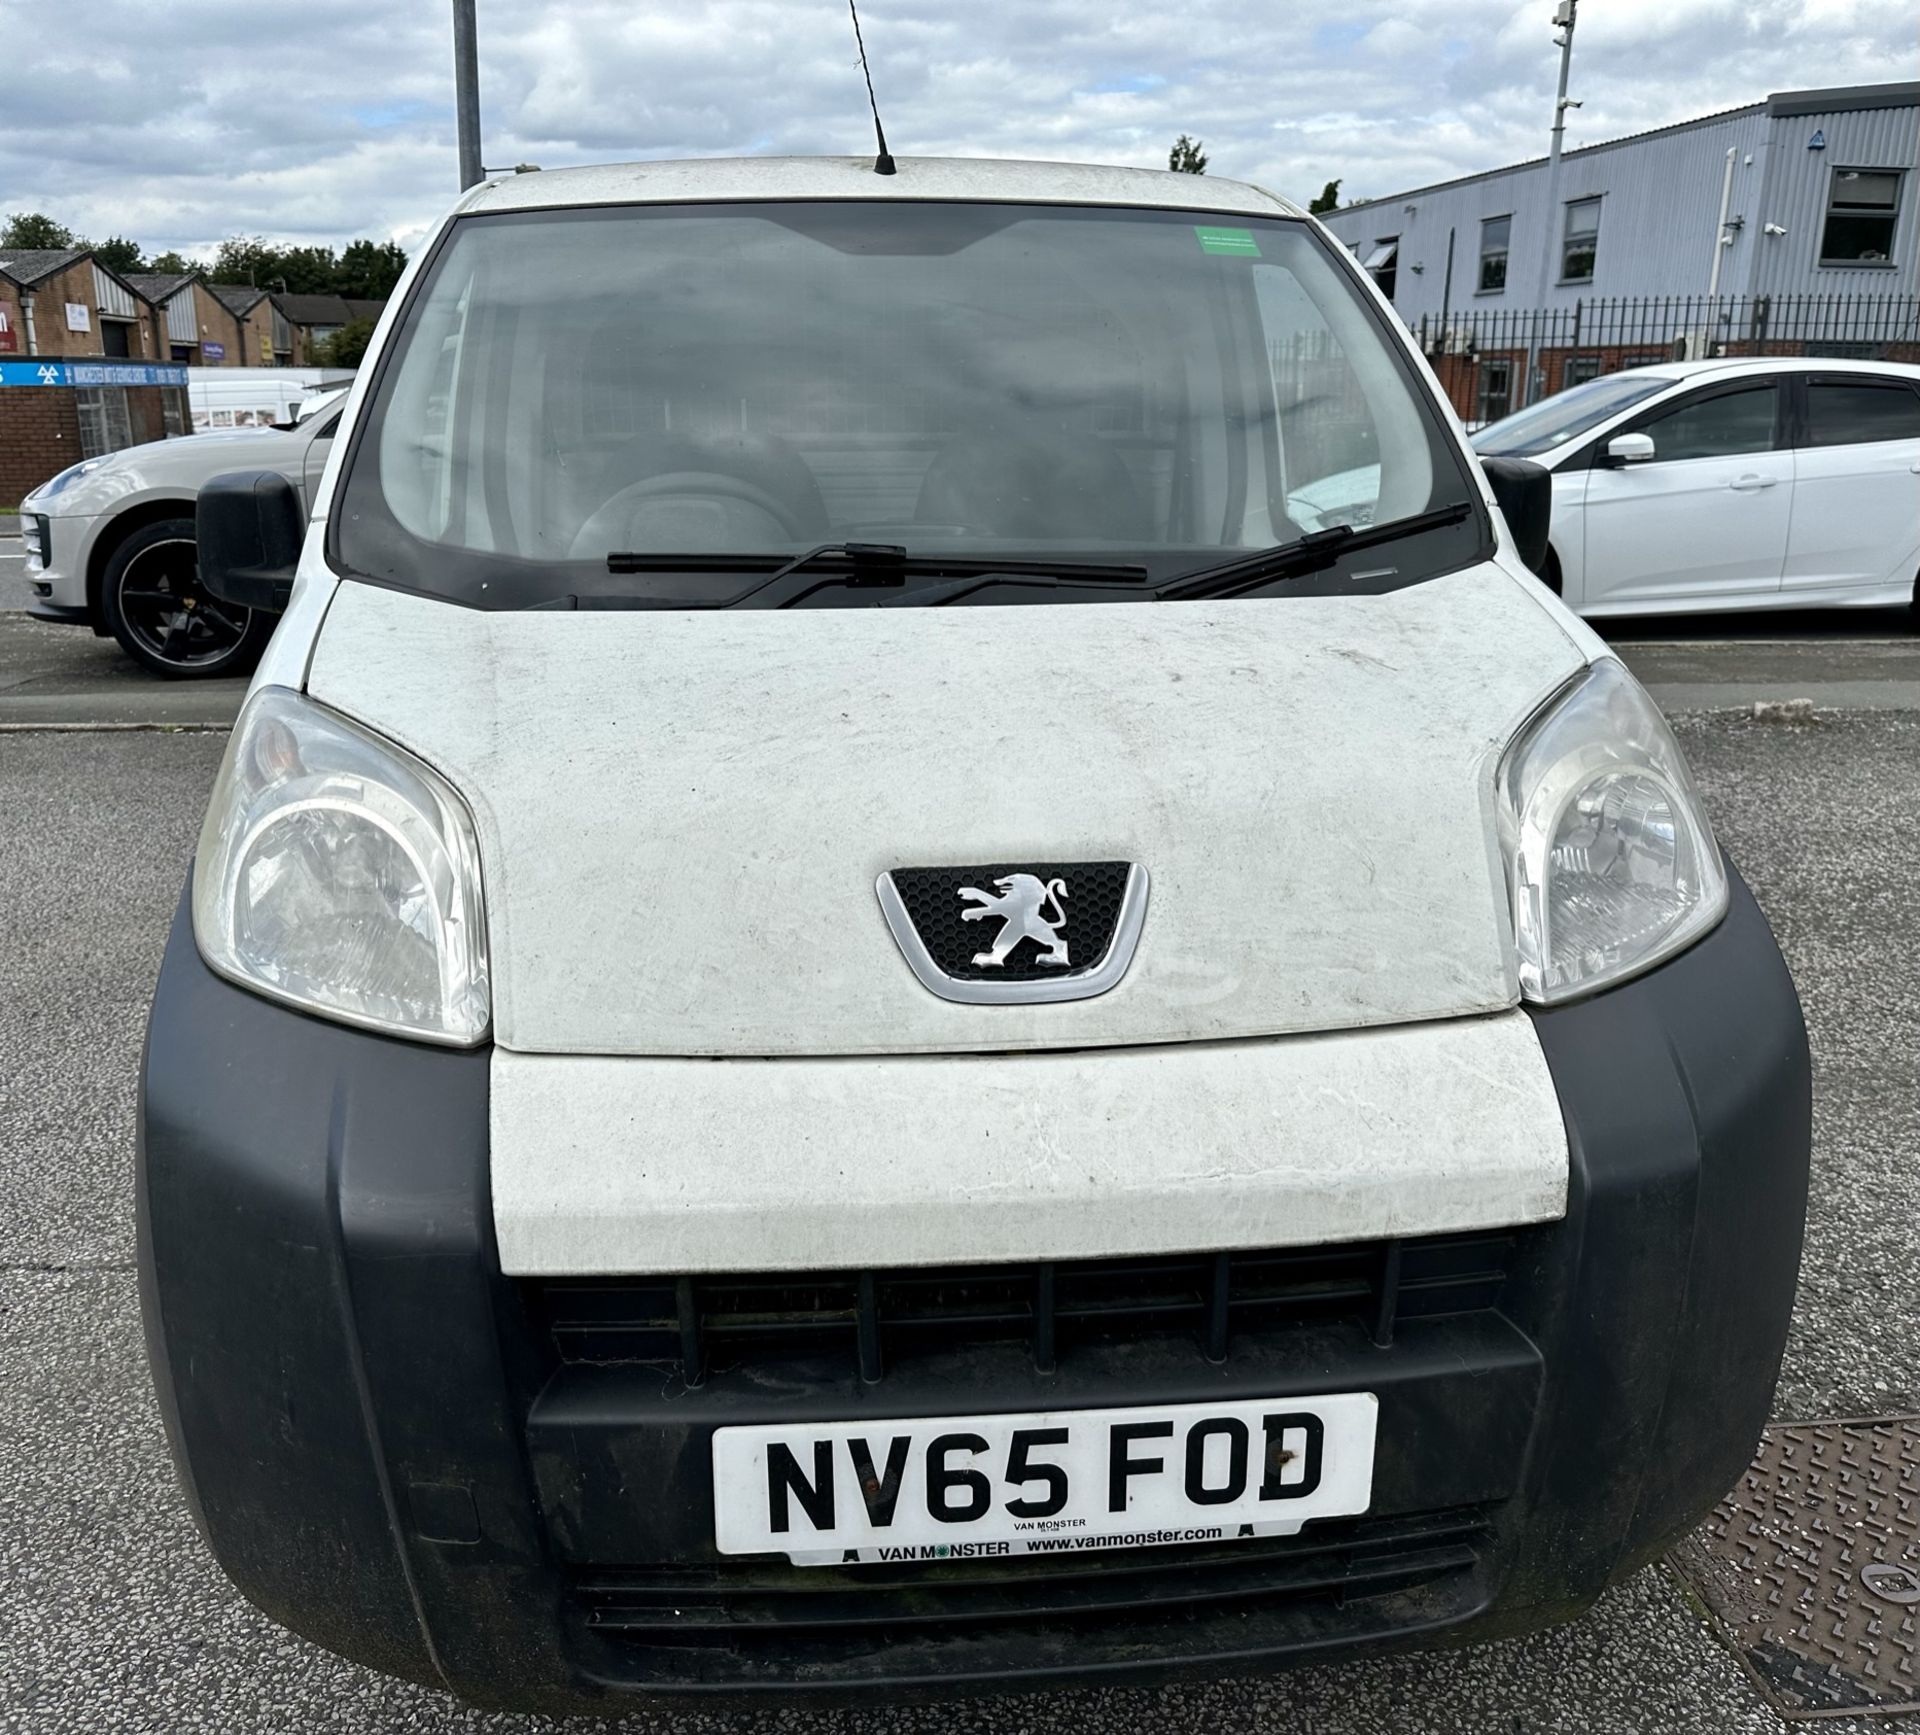 Peugeot Bipper Panel Van | NV65 FOD | Mileage: 53,510 | w/Built-In Cleaning Tank - see description - Image 4 of 18